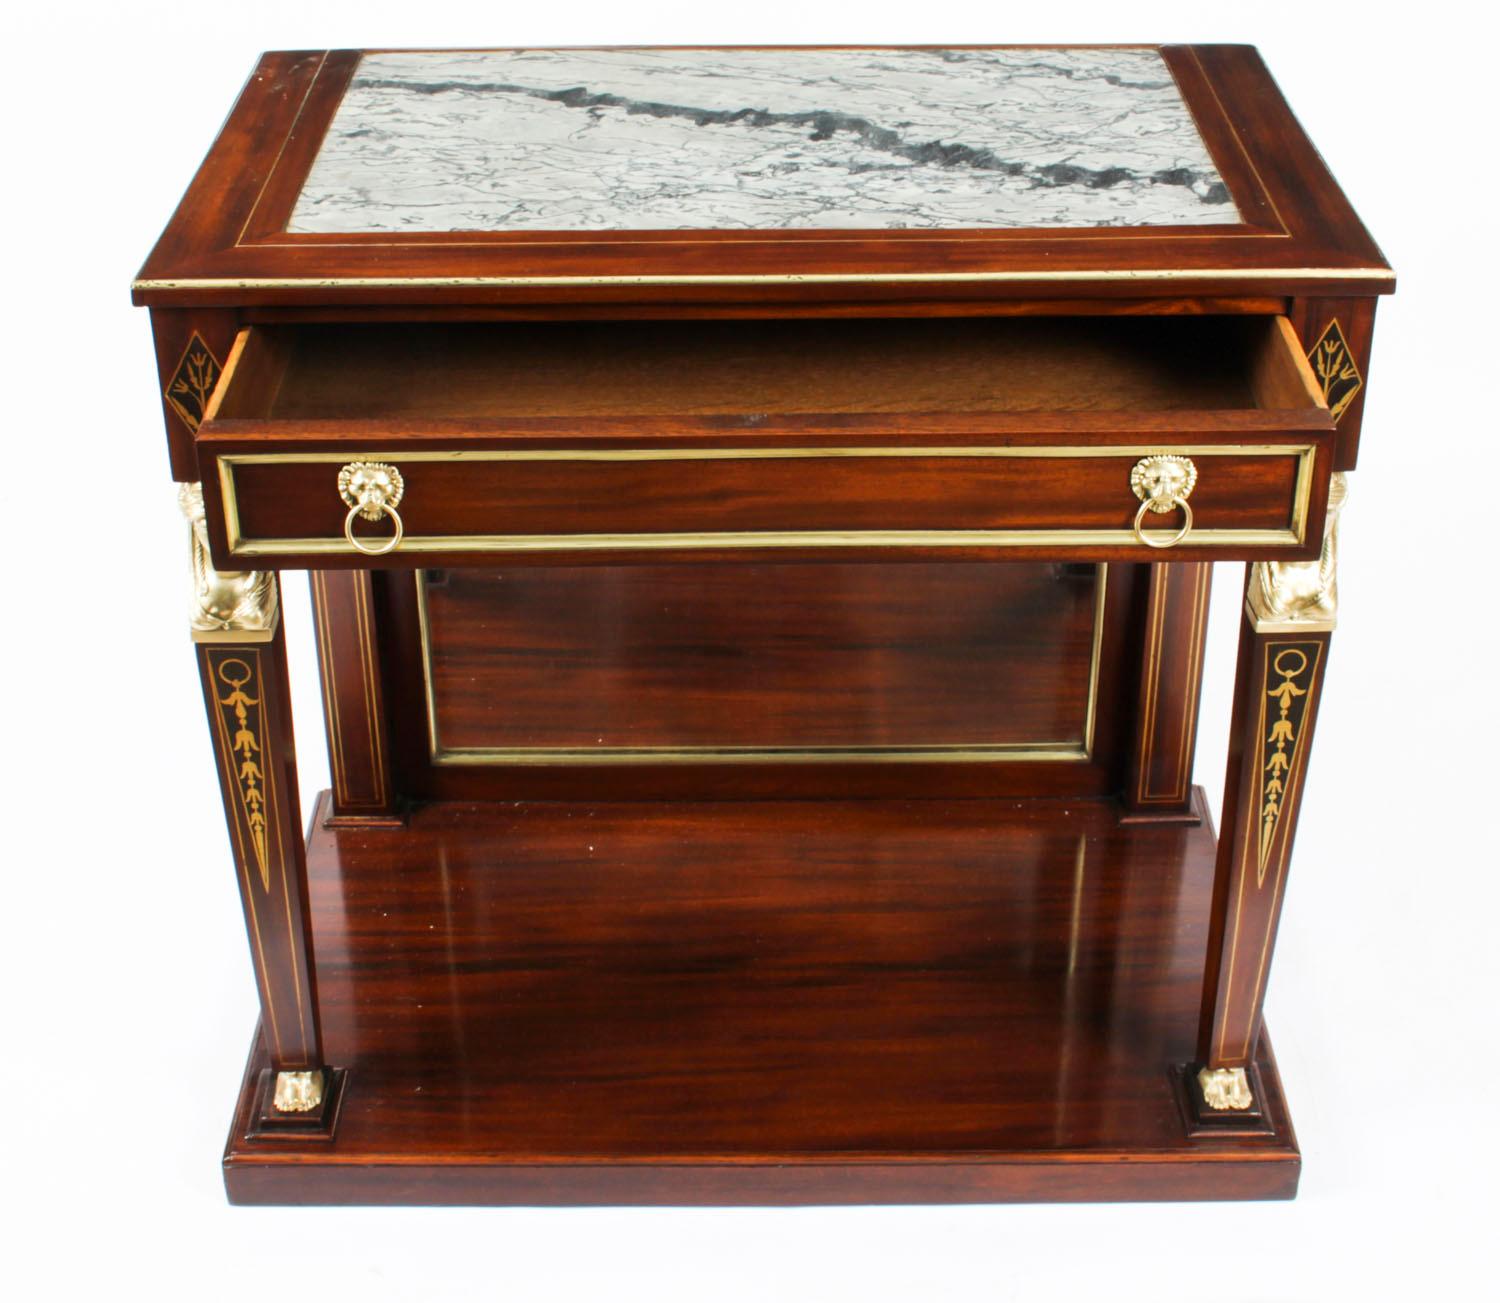 English Antique Regency Marble Top & Ormolu Mounted Console Table, Early 19th Century